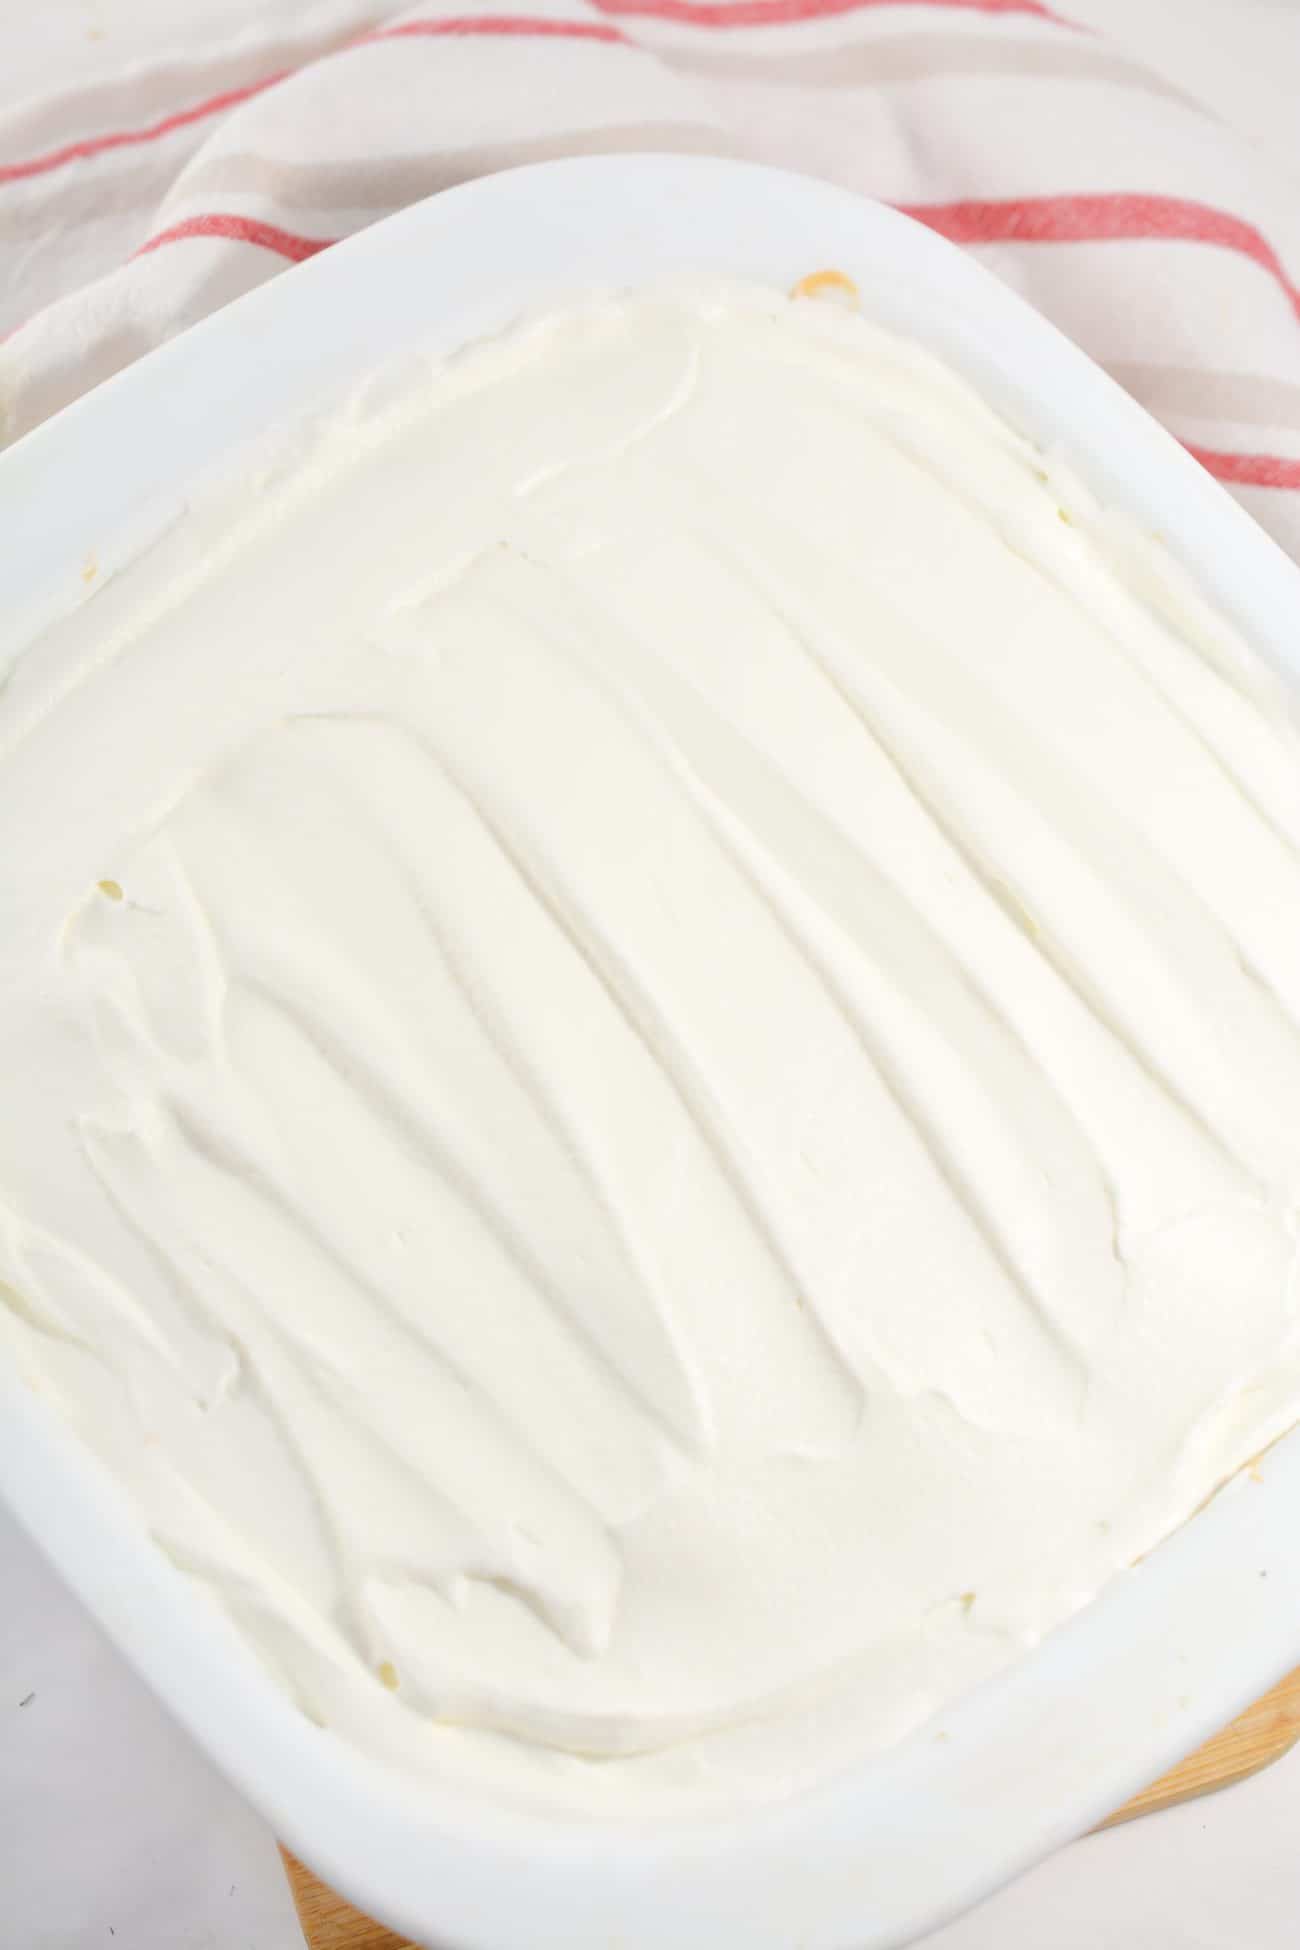 Combine the pudding layer ingredients until smooth and creamy.